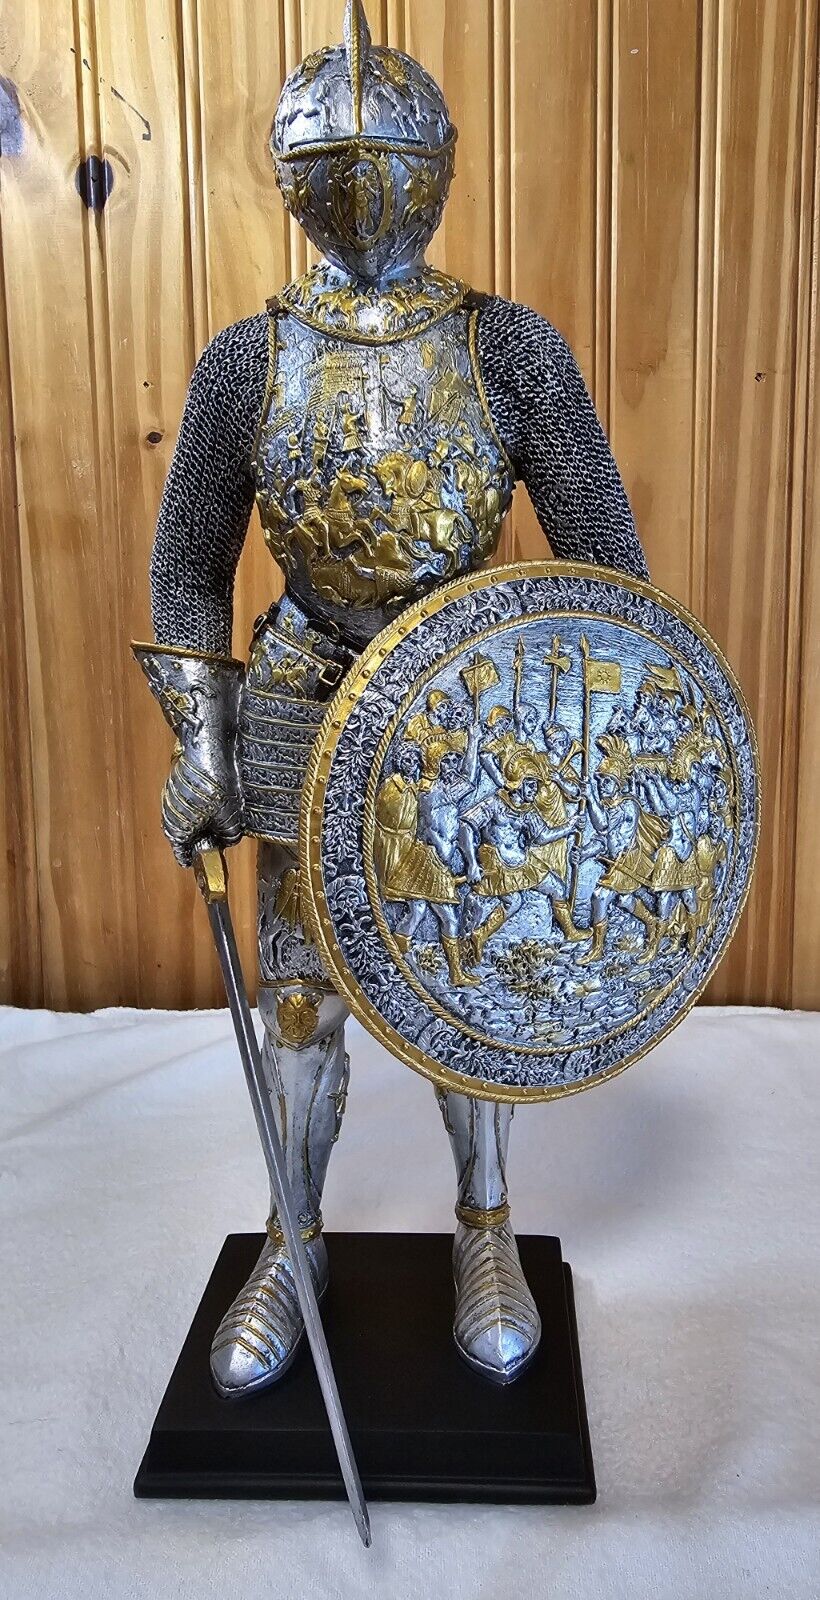 Veronese Design Medieval French Knight In Armor Statue Figure 